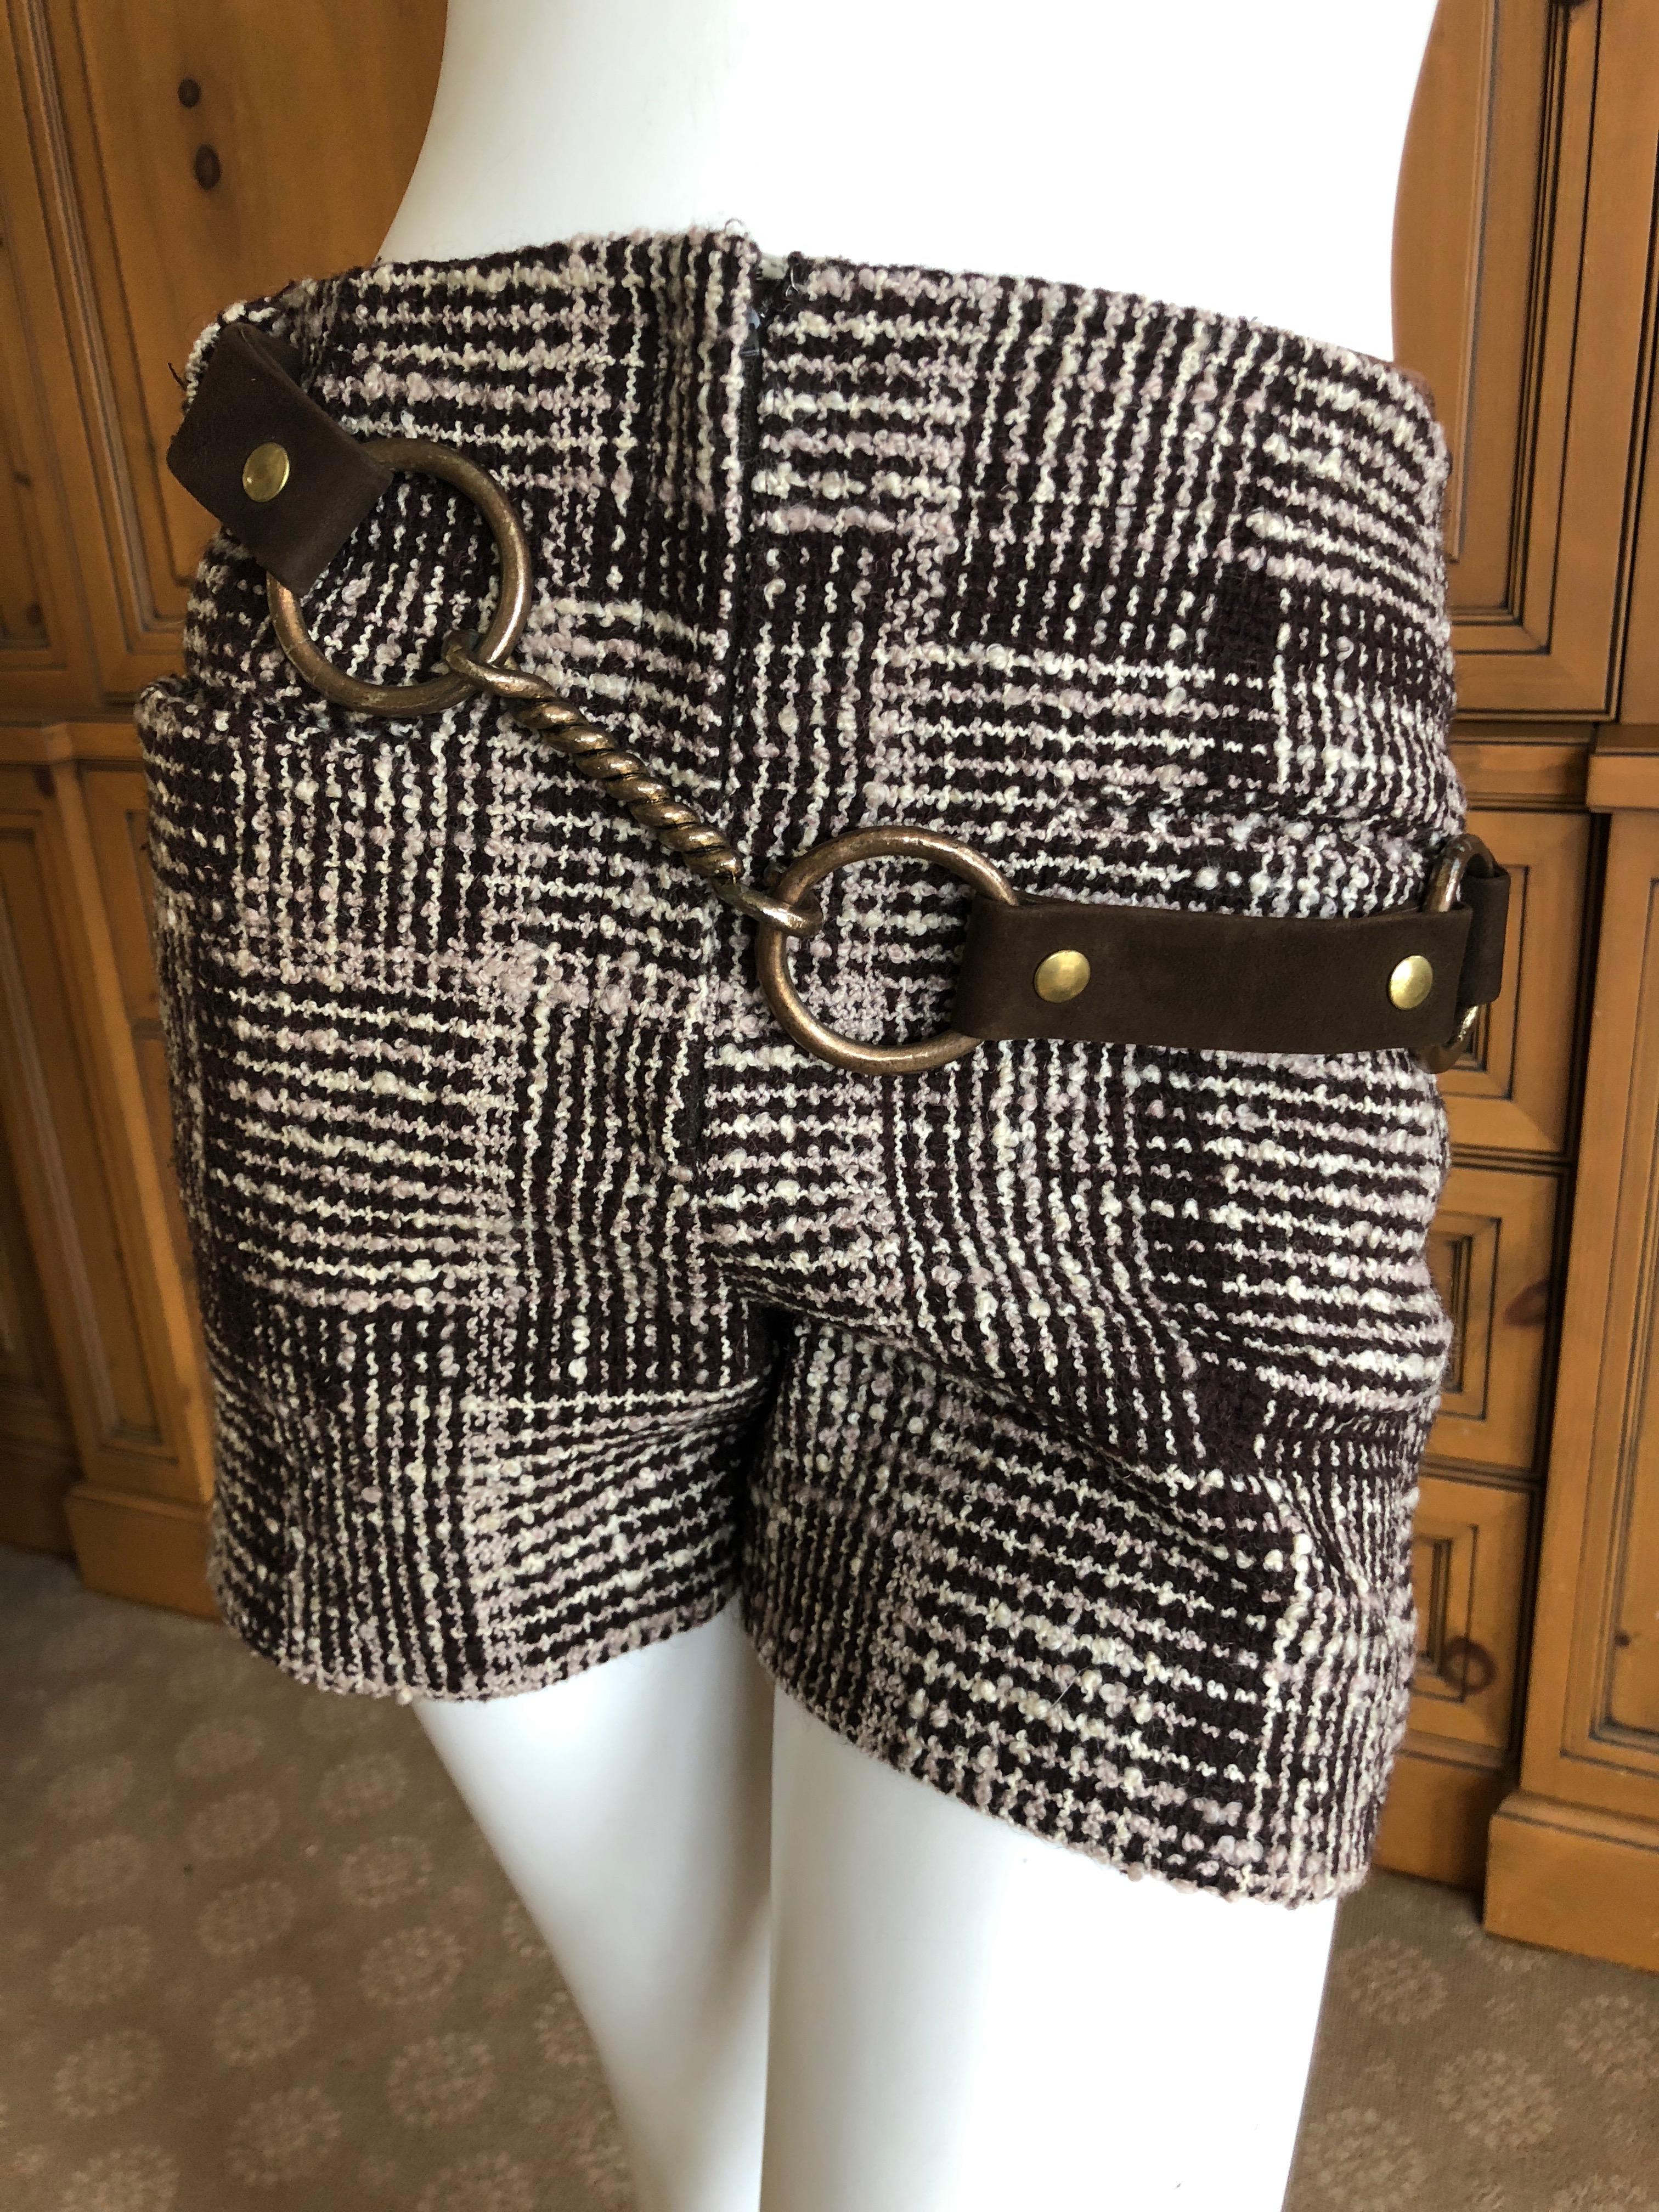 Cardinali Silk Lined Plaid Tweed Hot Pants w Bold Brass Hardware Leather Belt  In Good Condition For Sale In Cloverdale, CA